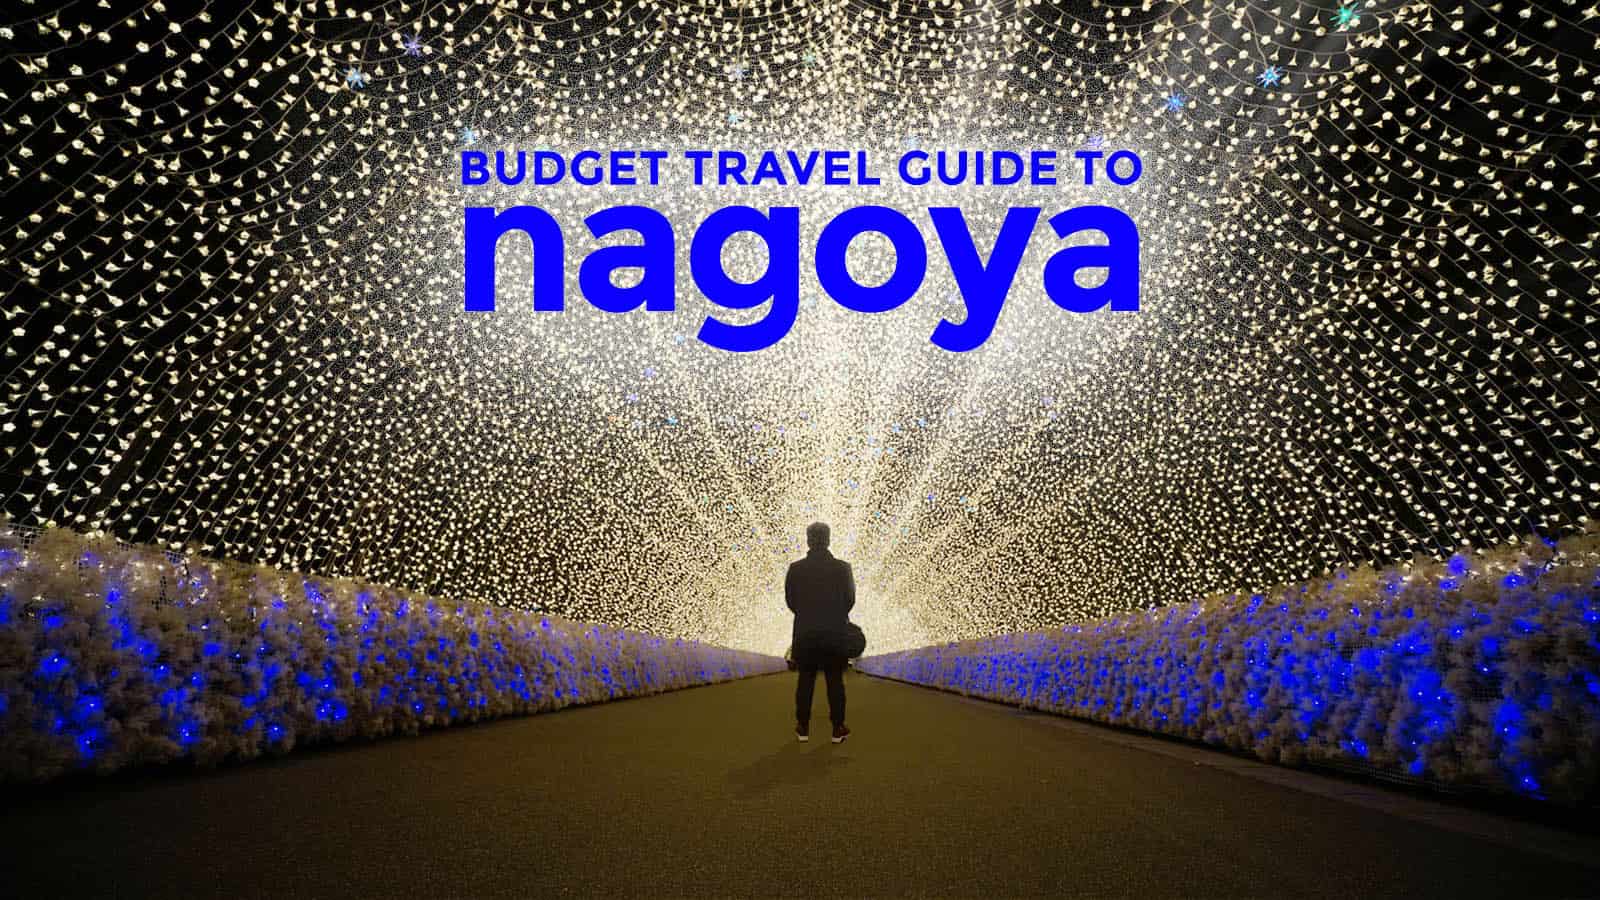 NAGOYA TRAVEL GUIDE with Budget Itinerary